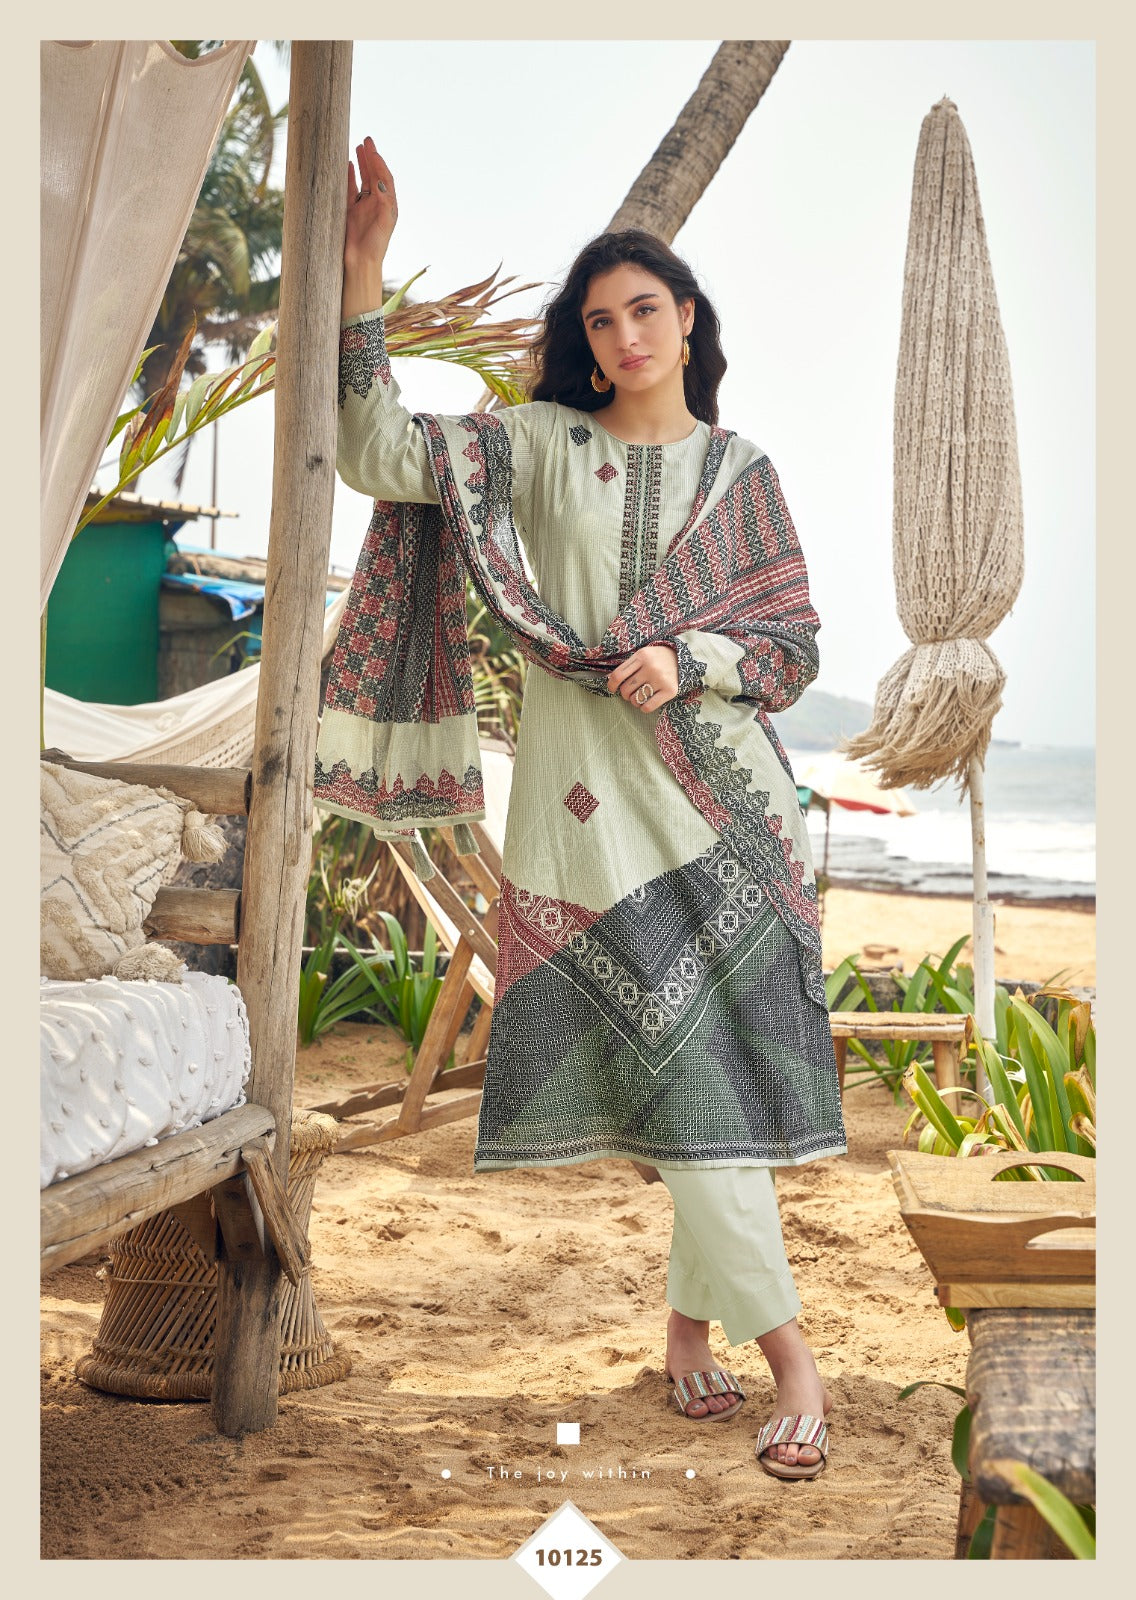 Seher Sadhana Lawn Cotton Pant Style Suits